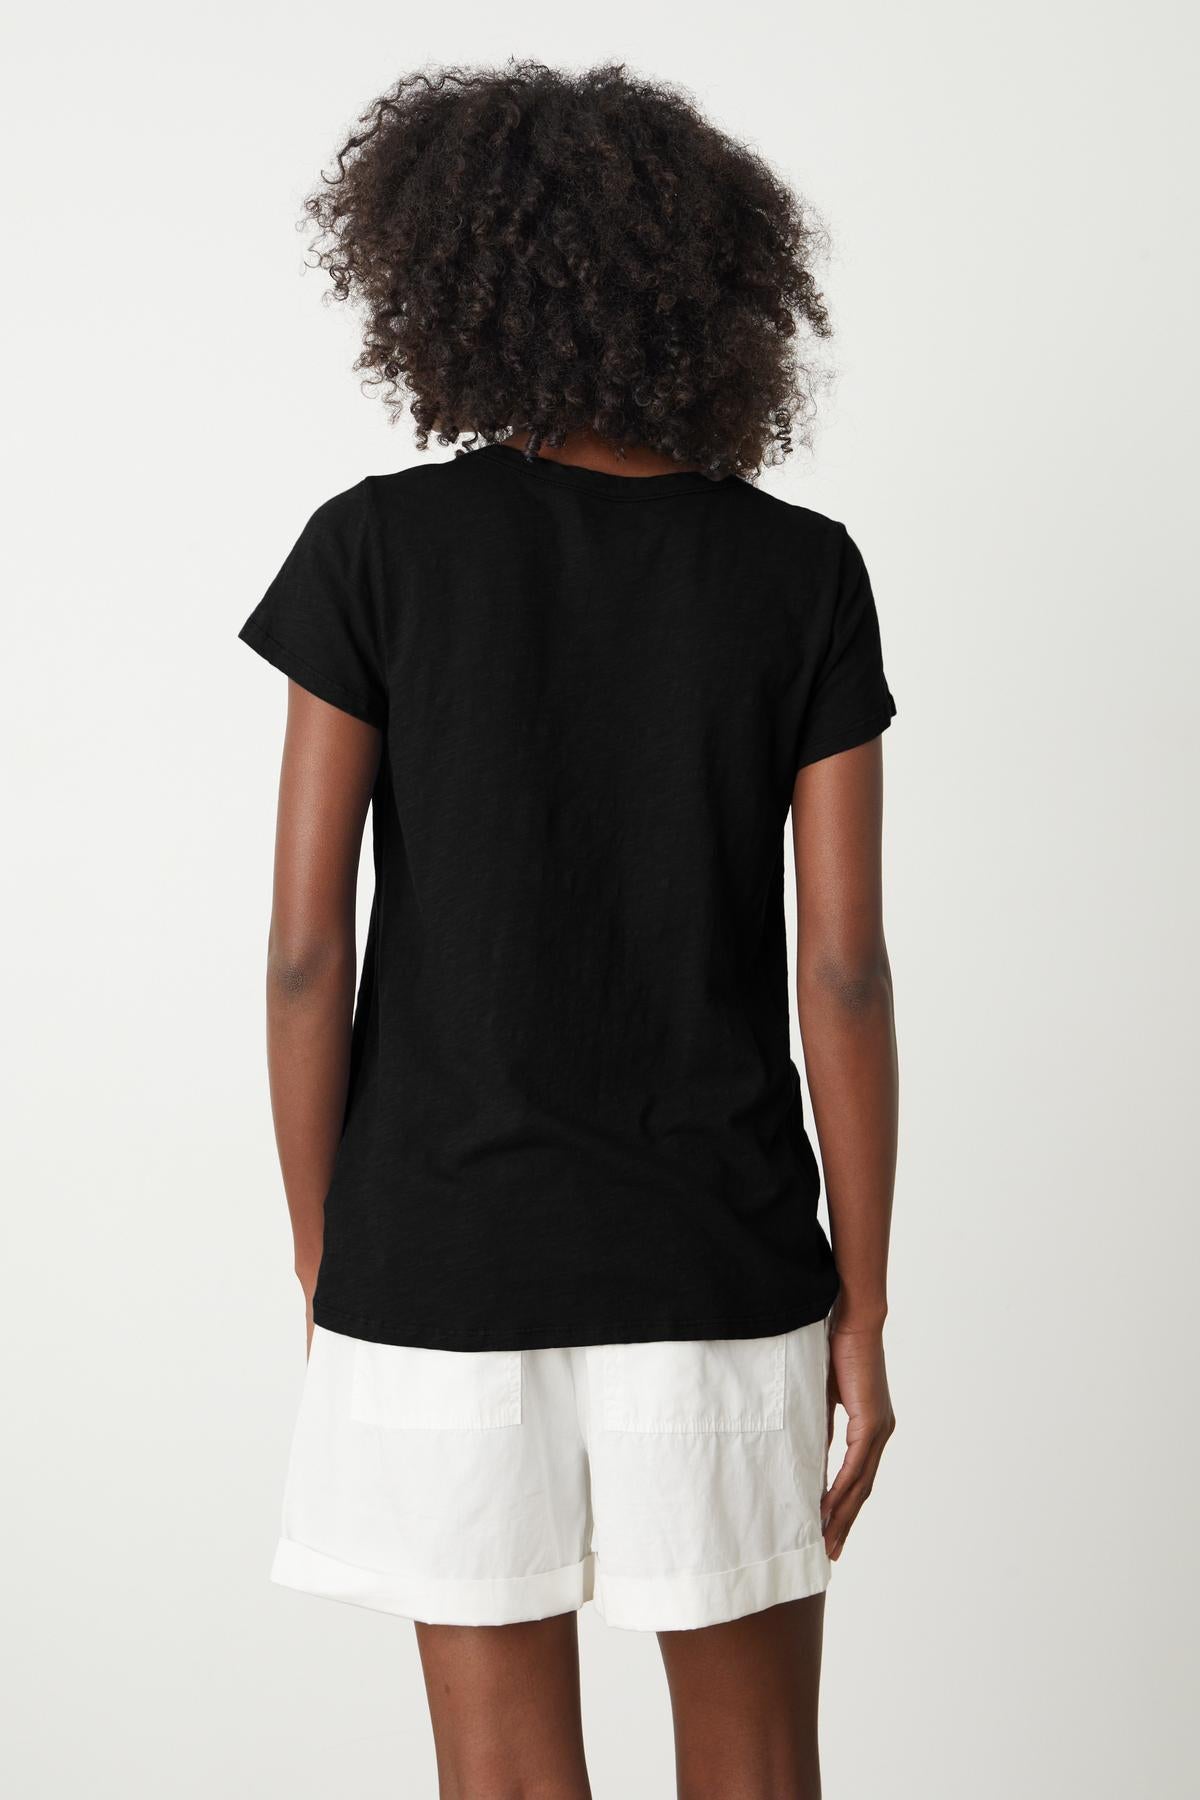 The back view of a woman wearing a Velvet by Graham & Spencer TILLY ORIGINAL SLUB CREW NECK TEE and shorts.-26235782103233